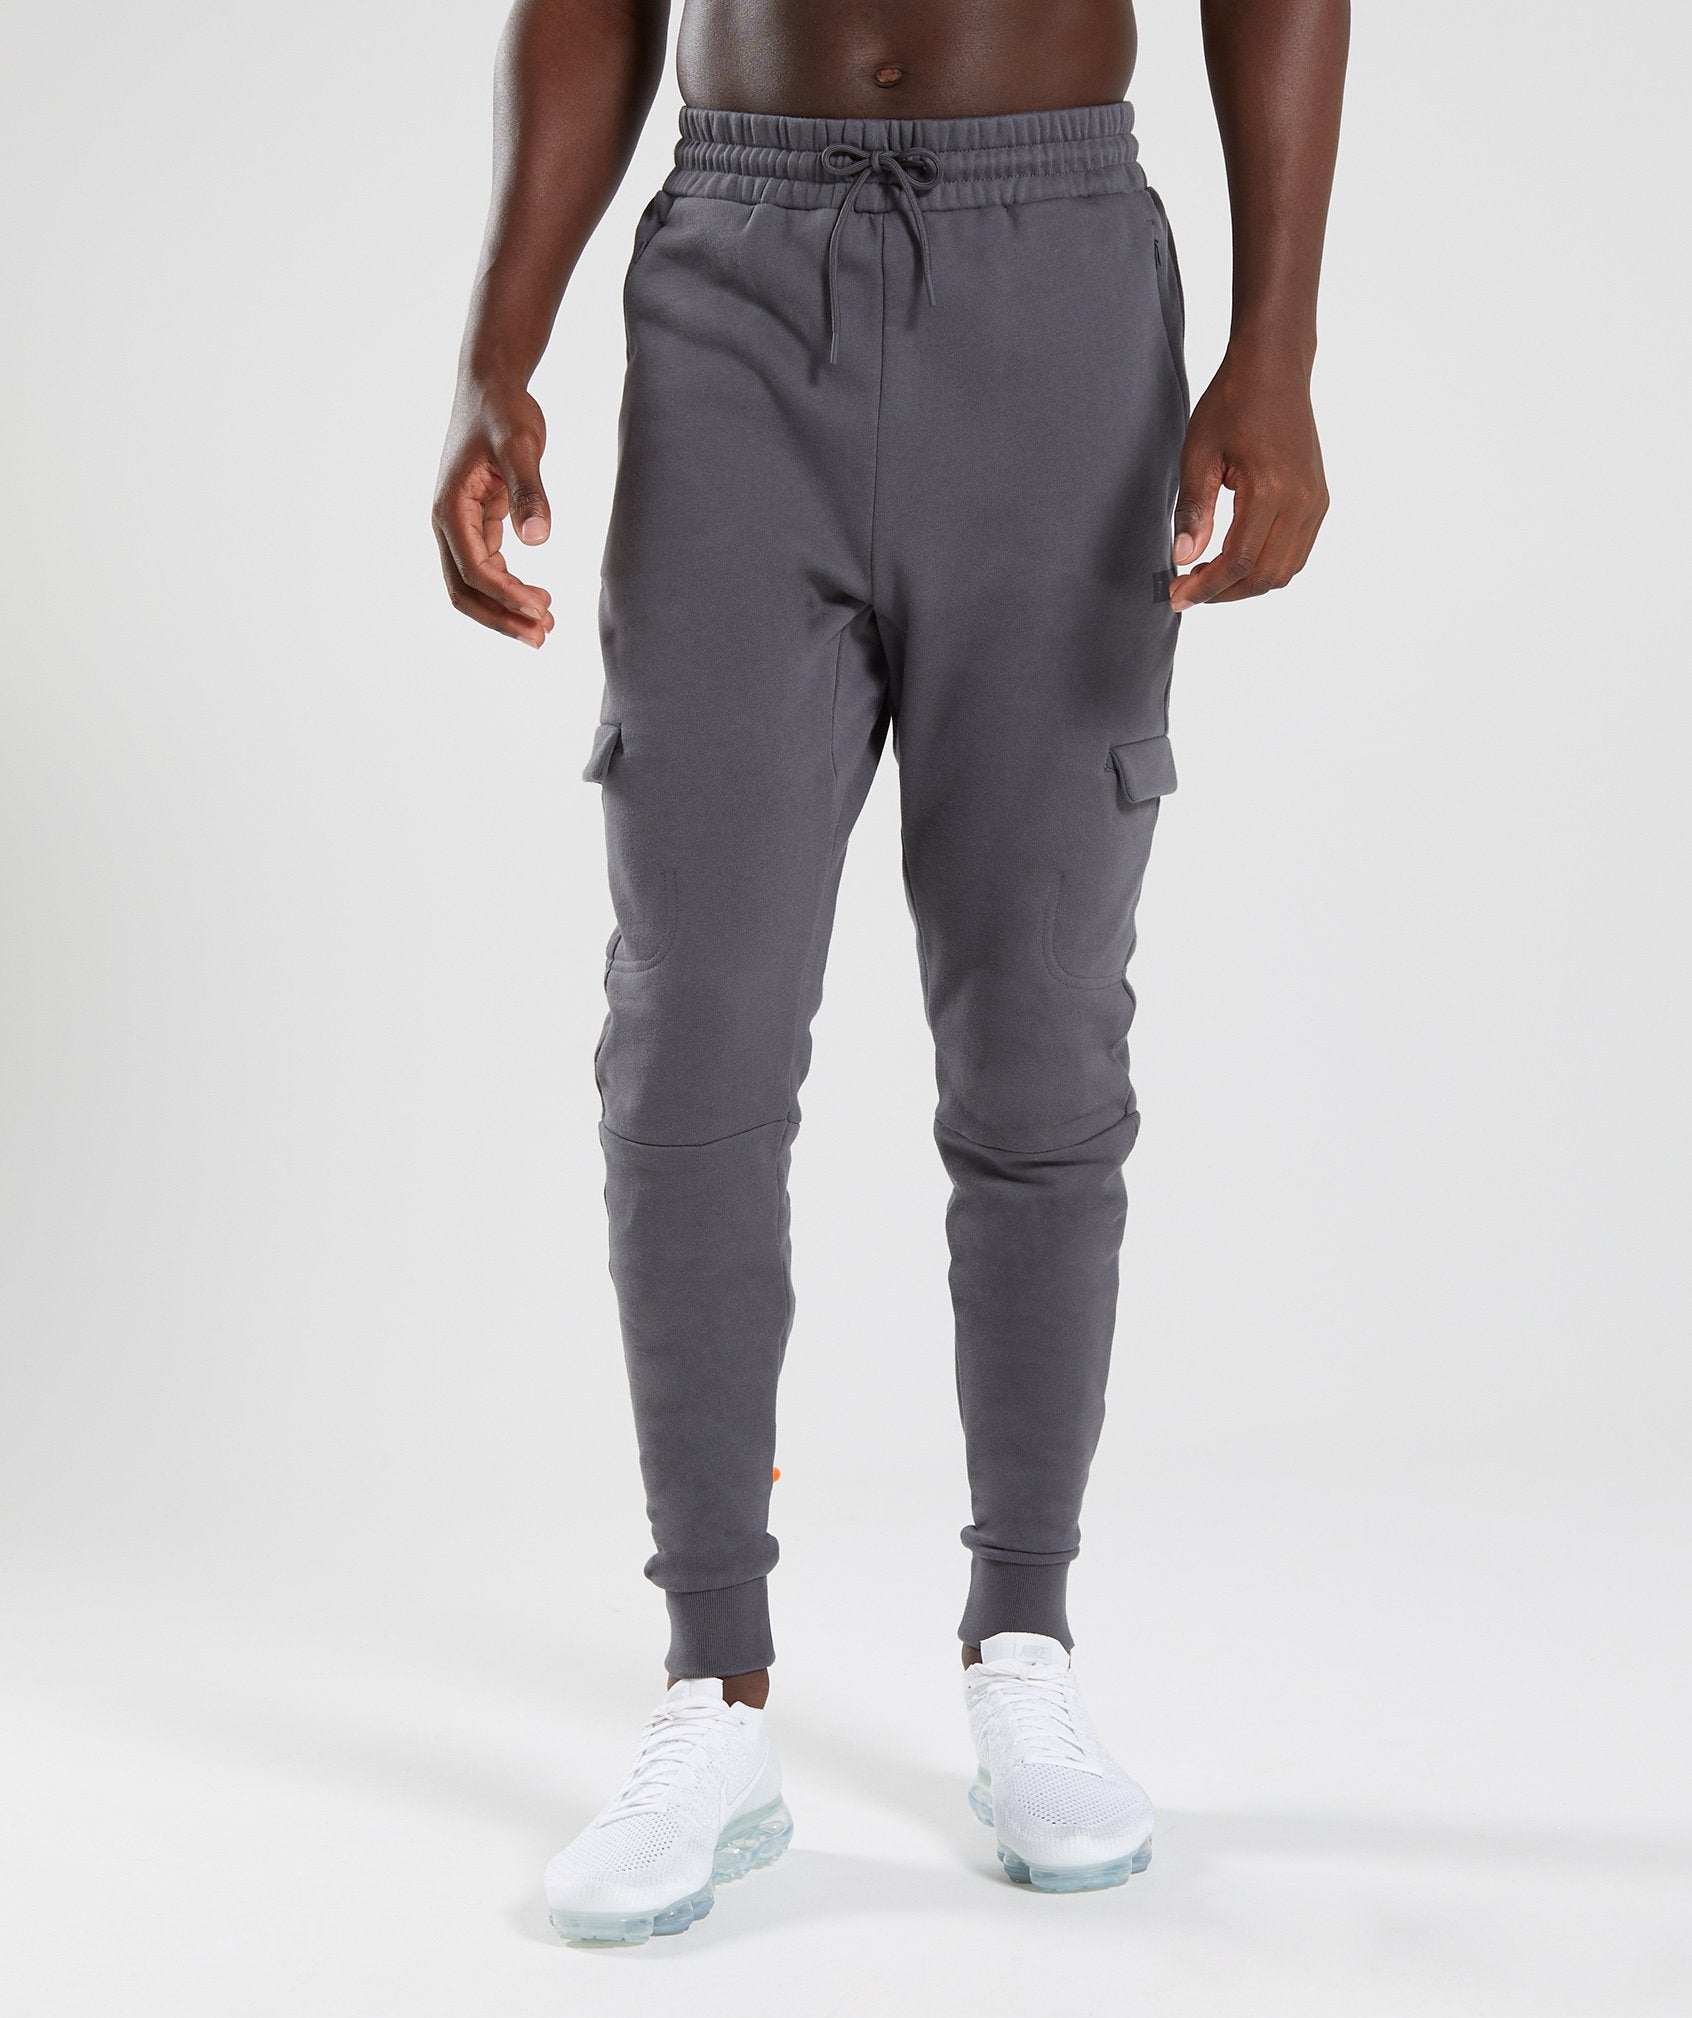 Cargo Bottoms in Charcoal - view 2